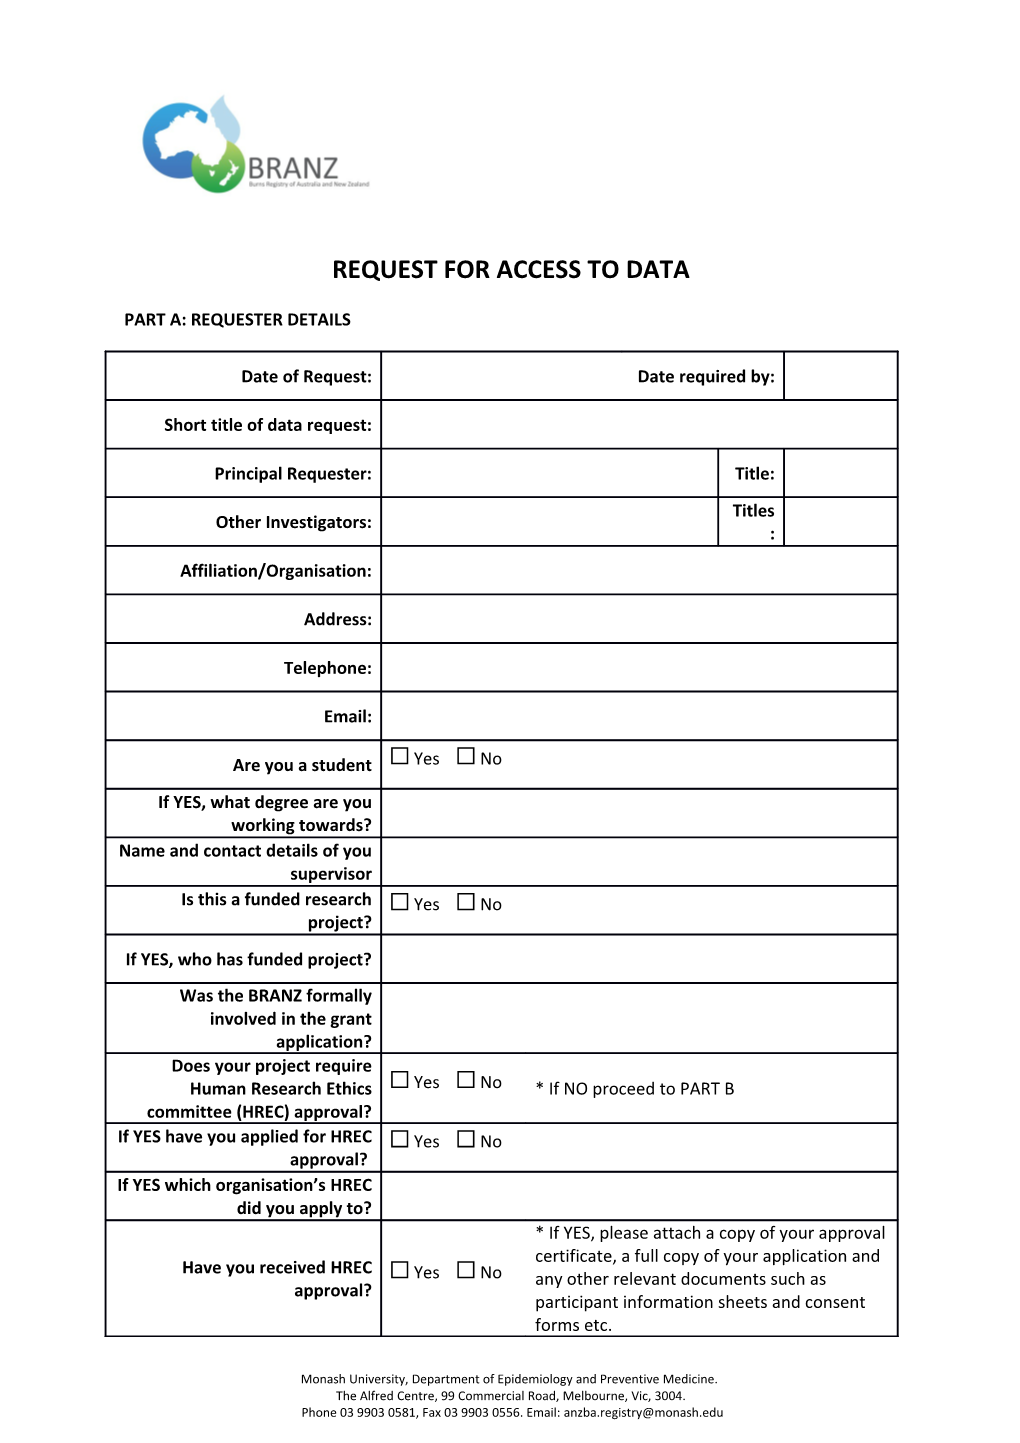 Request for Access to Data